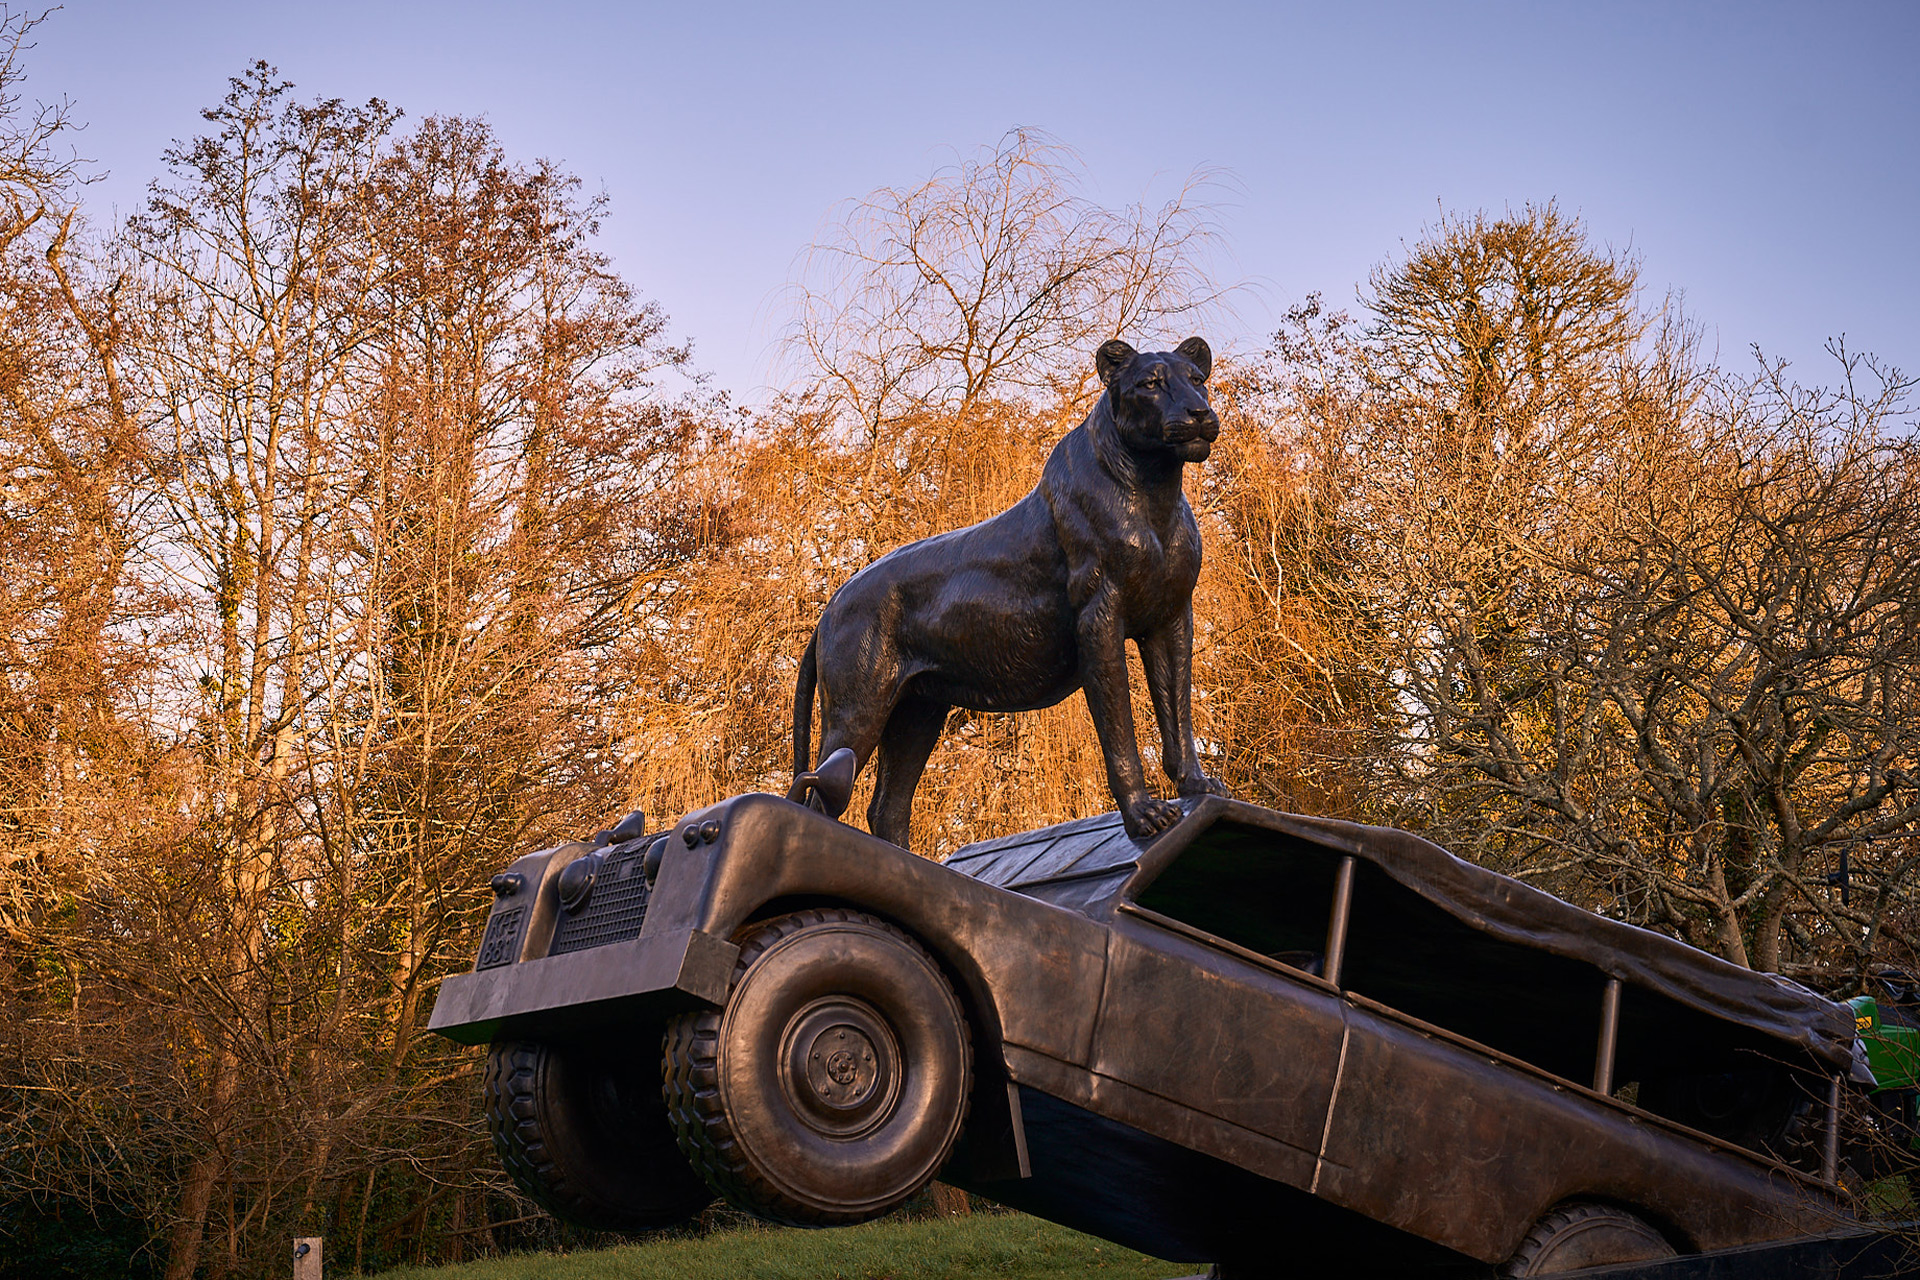 Sculpture of lion standing on the bonnet of a car.